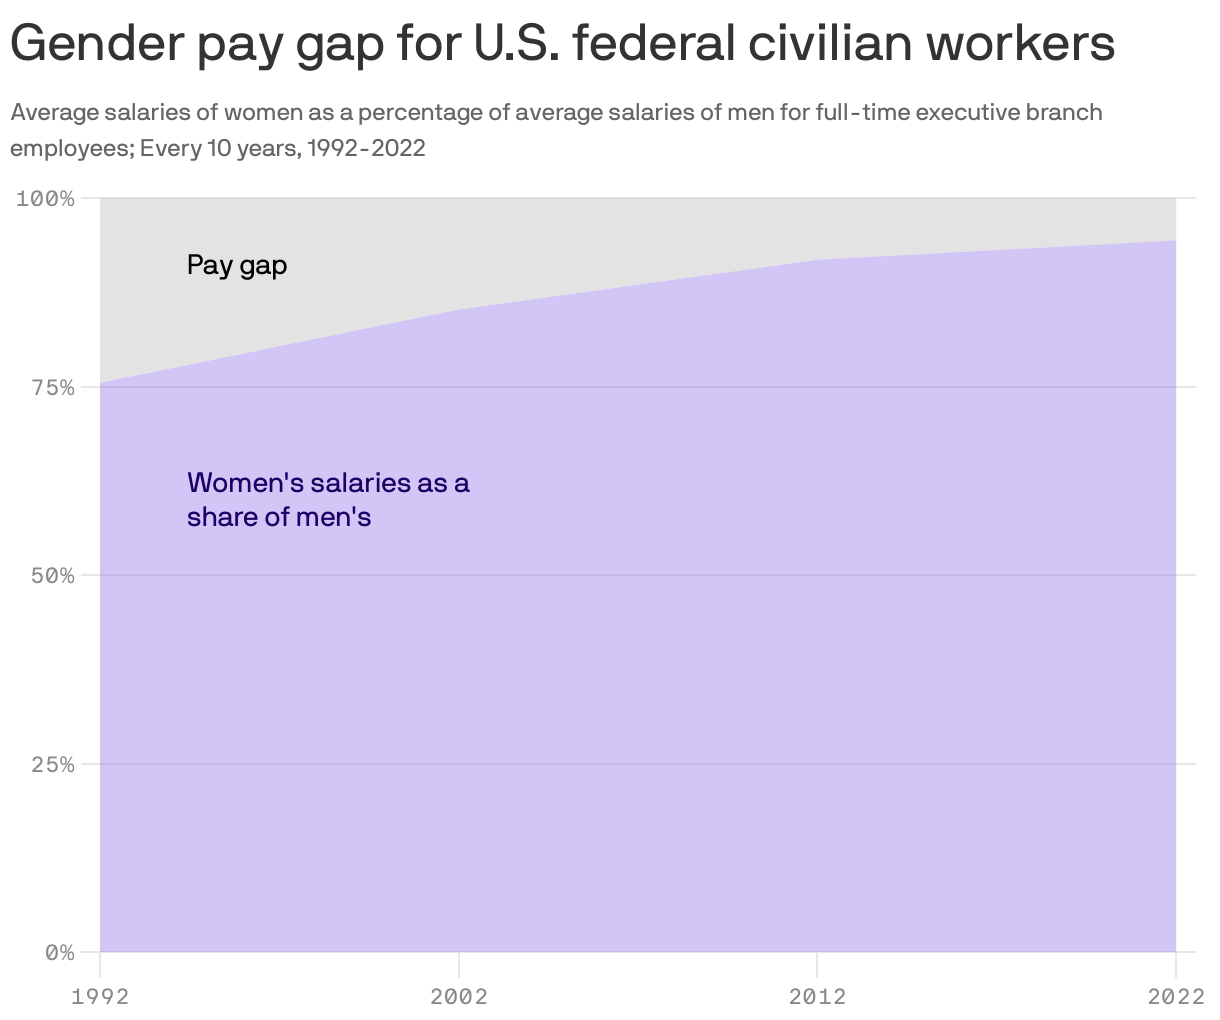 Gender pay gap for U.S. federal civilian workers